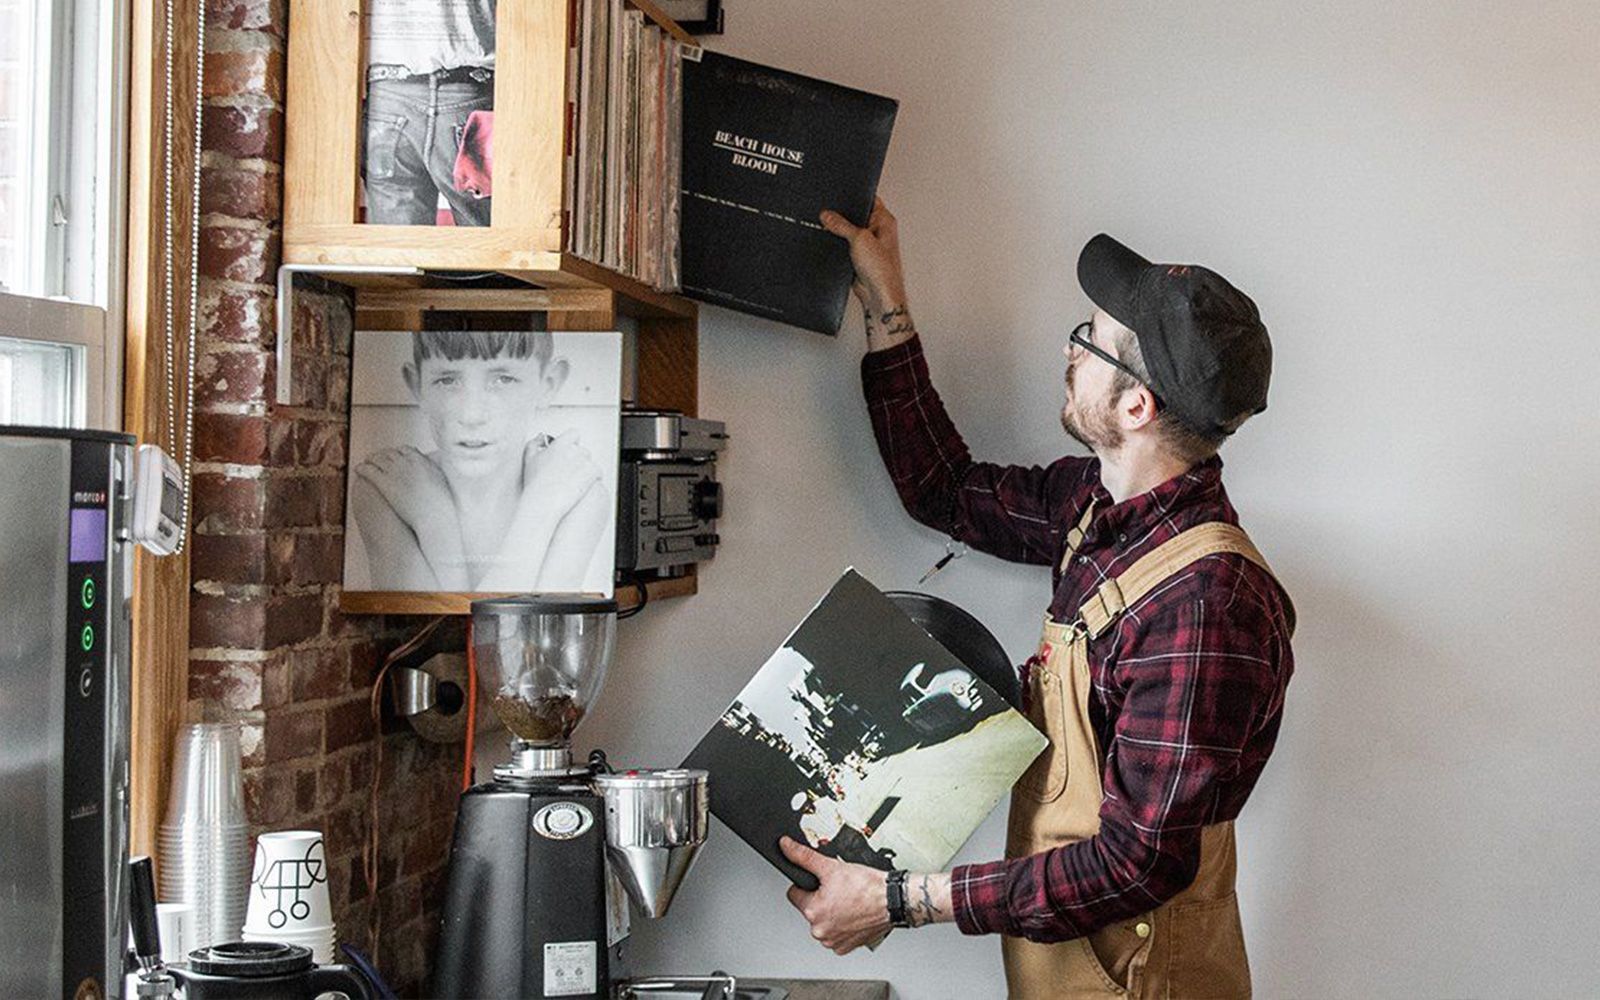 A man in a hat and suspenders is selecting vinyl records from a shelf in a cozy brick-walled room, with a coffee grinder visible on the left.